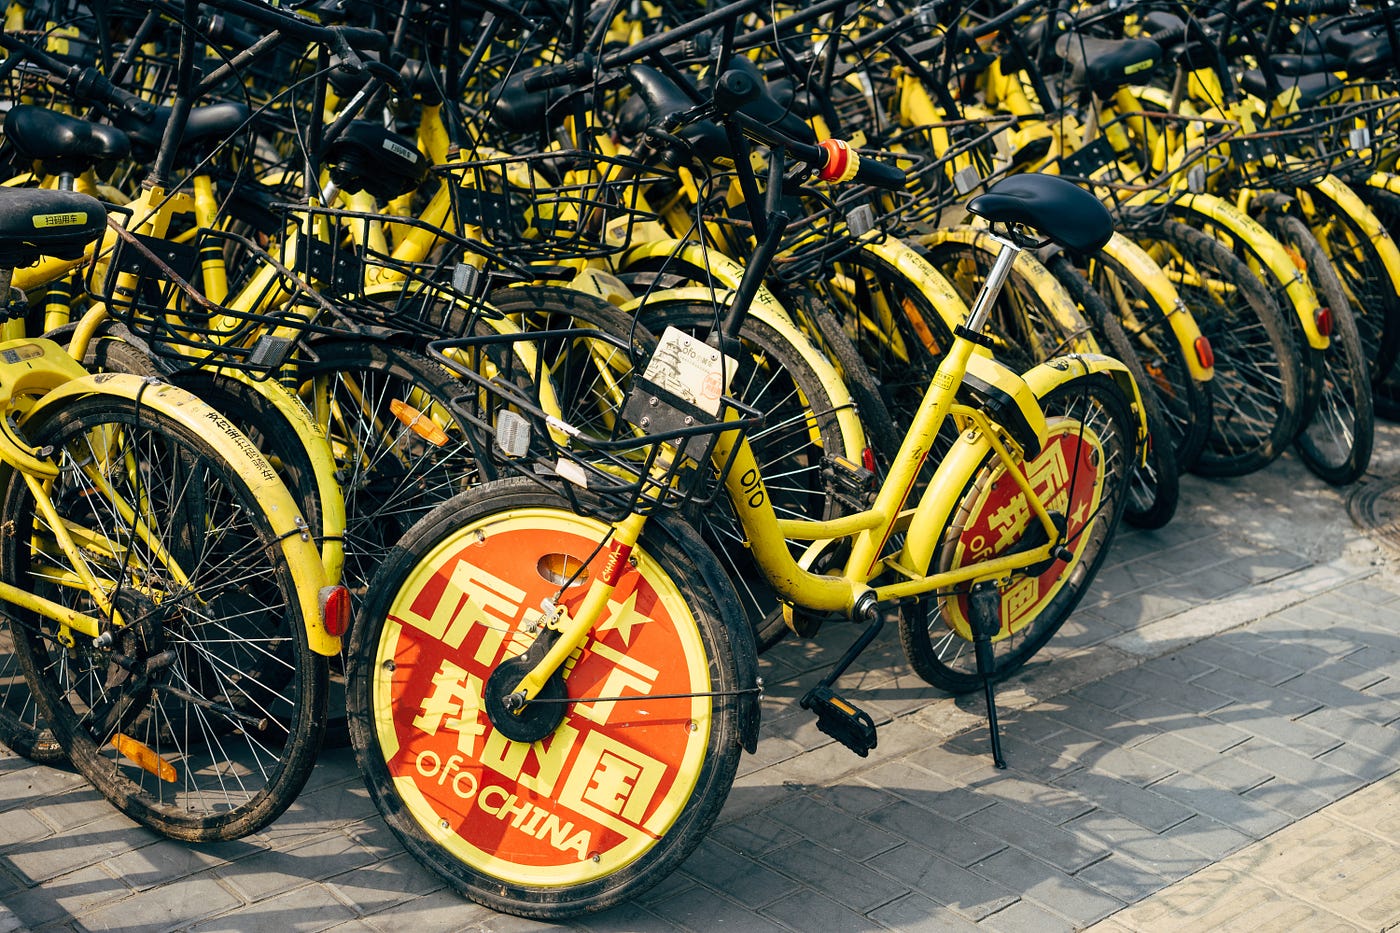 Many yellow bikes from the bike sharing program parked on streets